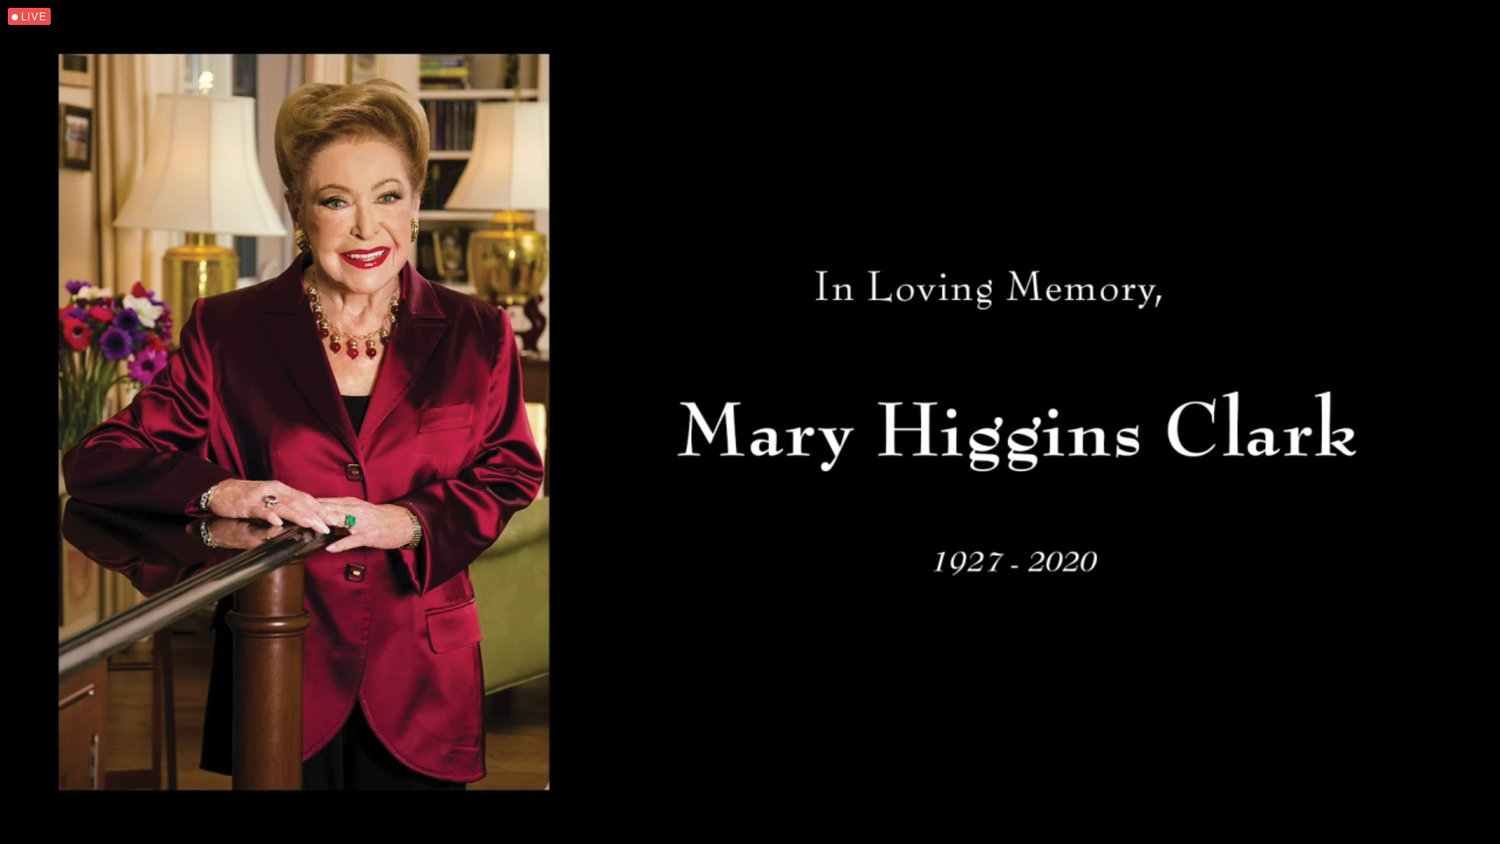 Longtime benefactor the late Mary Higgins Clark, a Bronx-born Catholic and bestselling author who passed away in January at age 92, was honored posthumously for her devotion and generosity through the years.